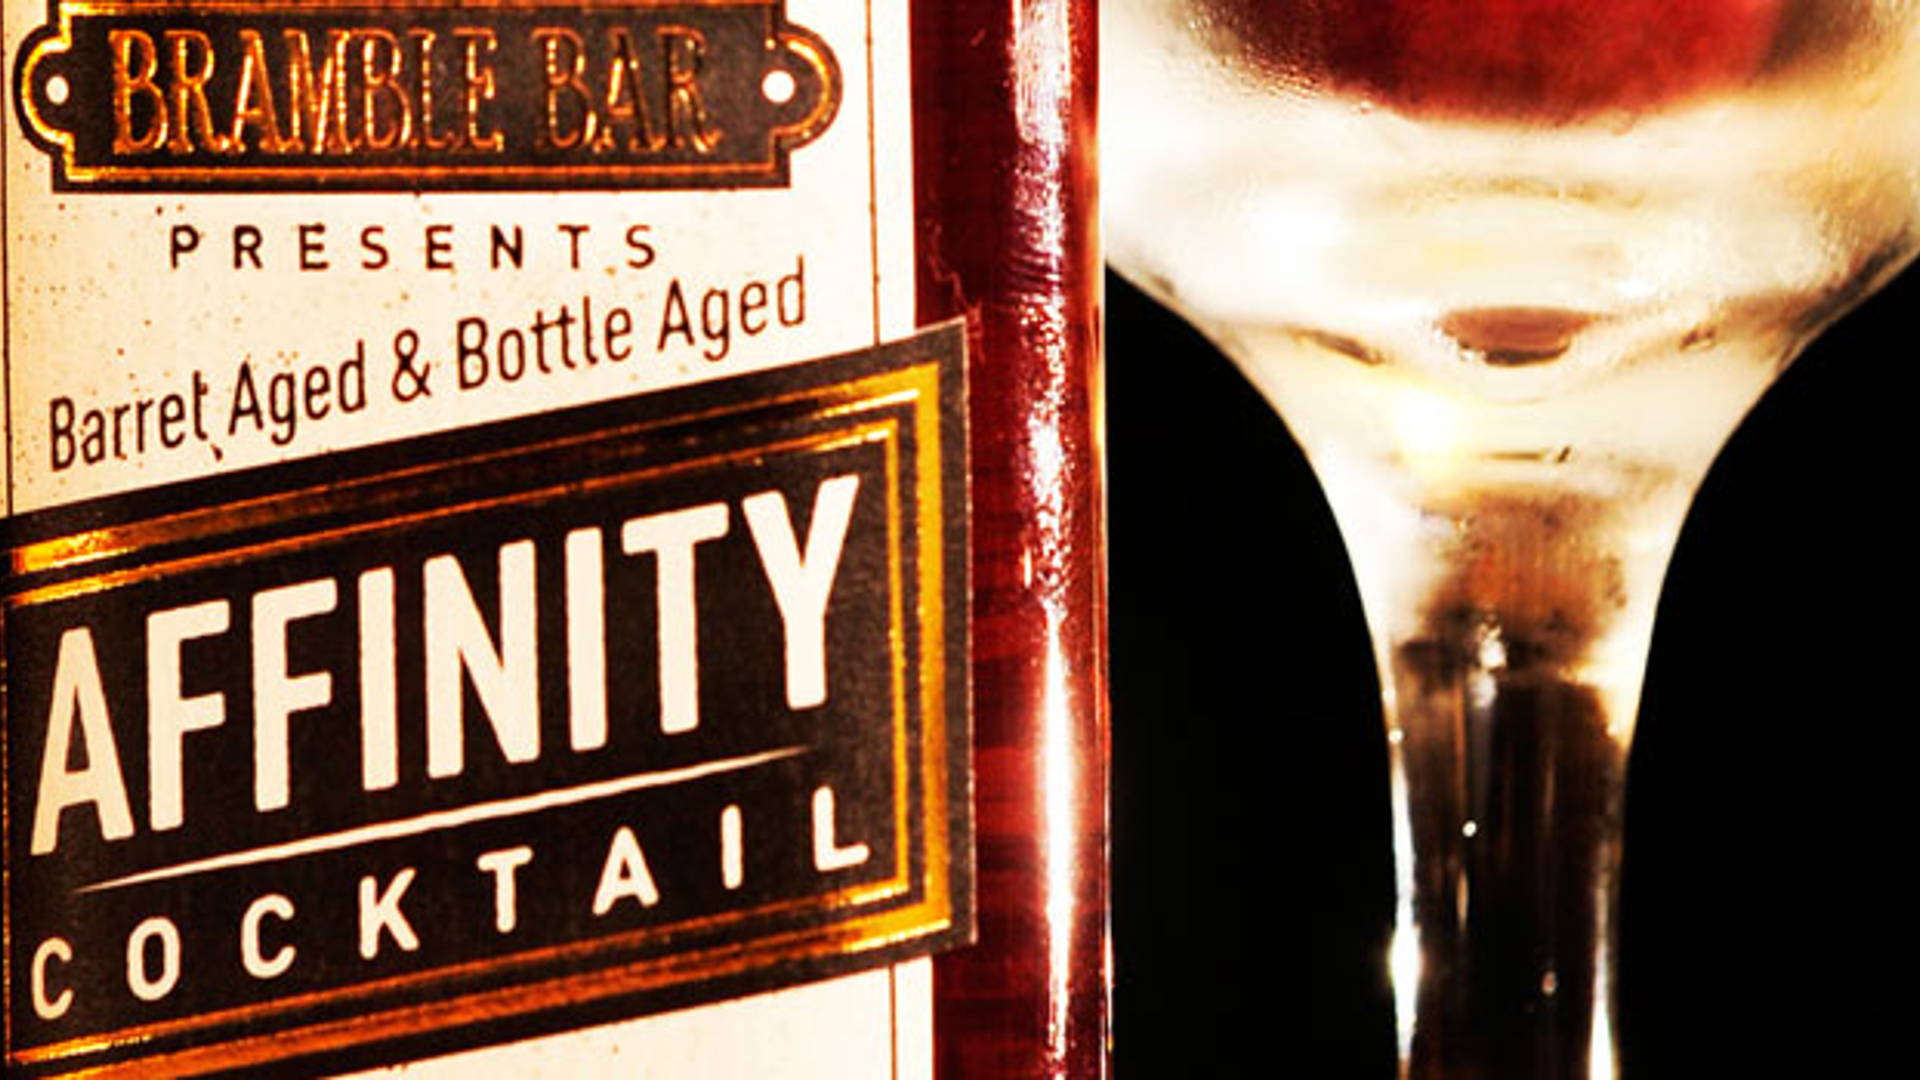 Featured image for Bramble Bar Affinity Cocktail